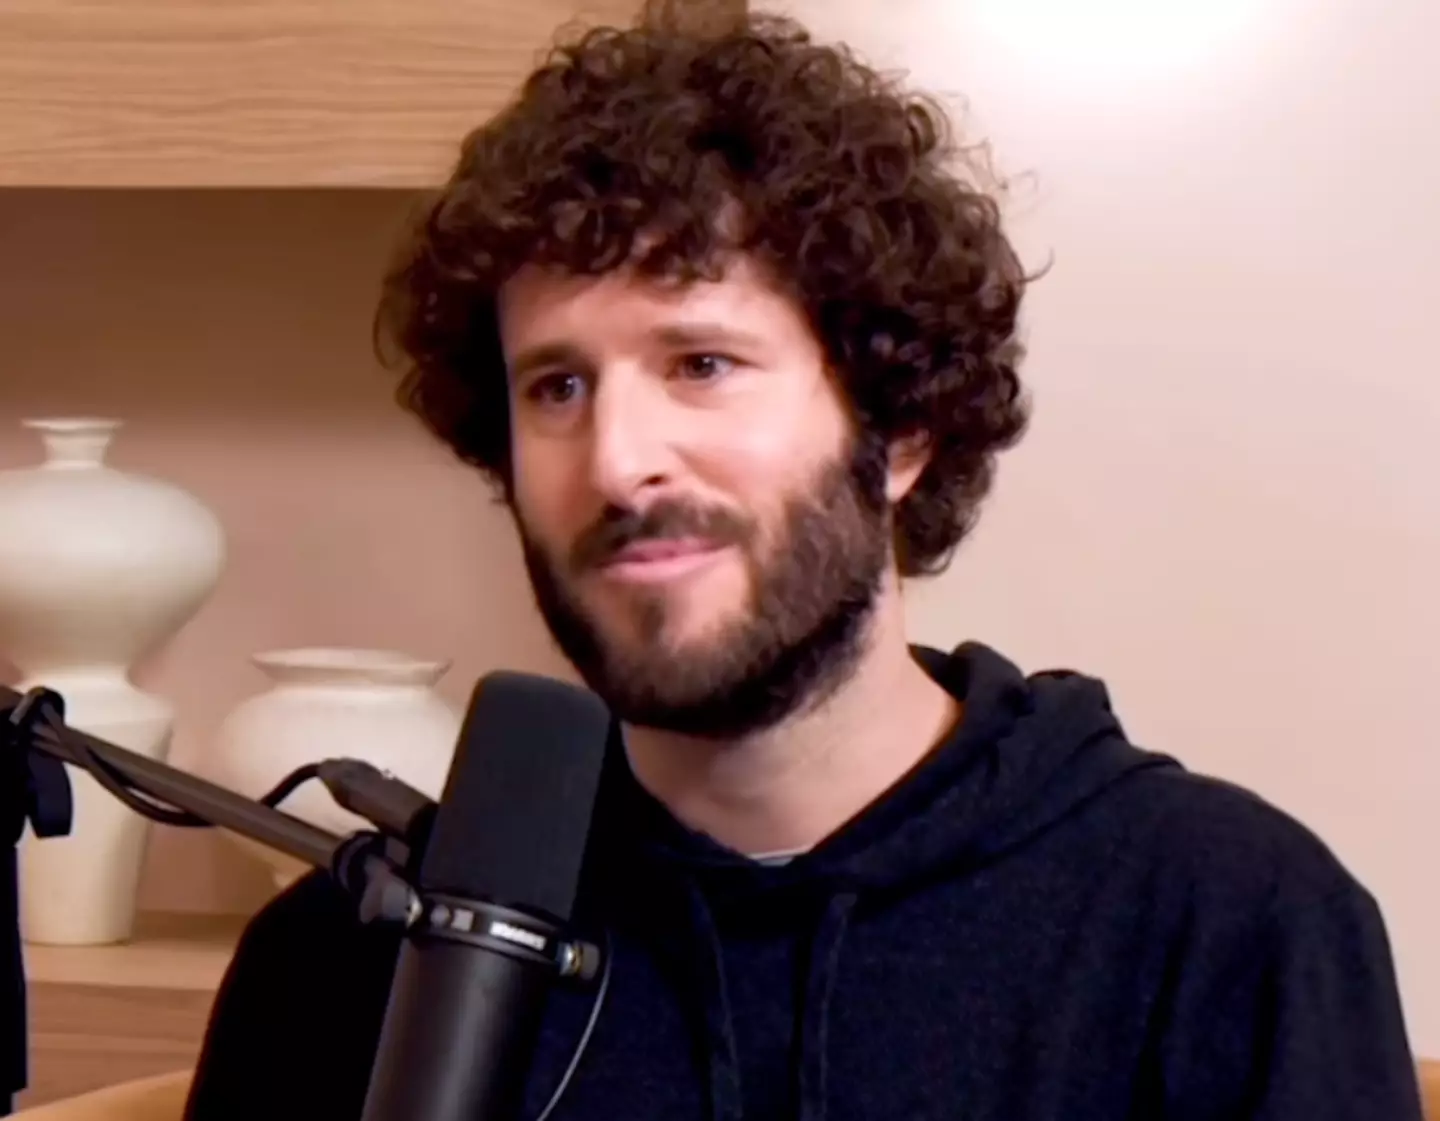 Lil Dicky had a condition called Hypospadias when he was born.